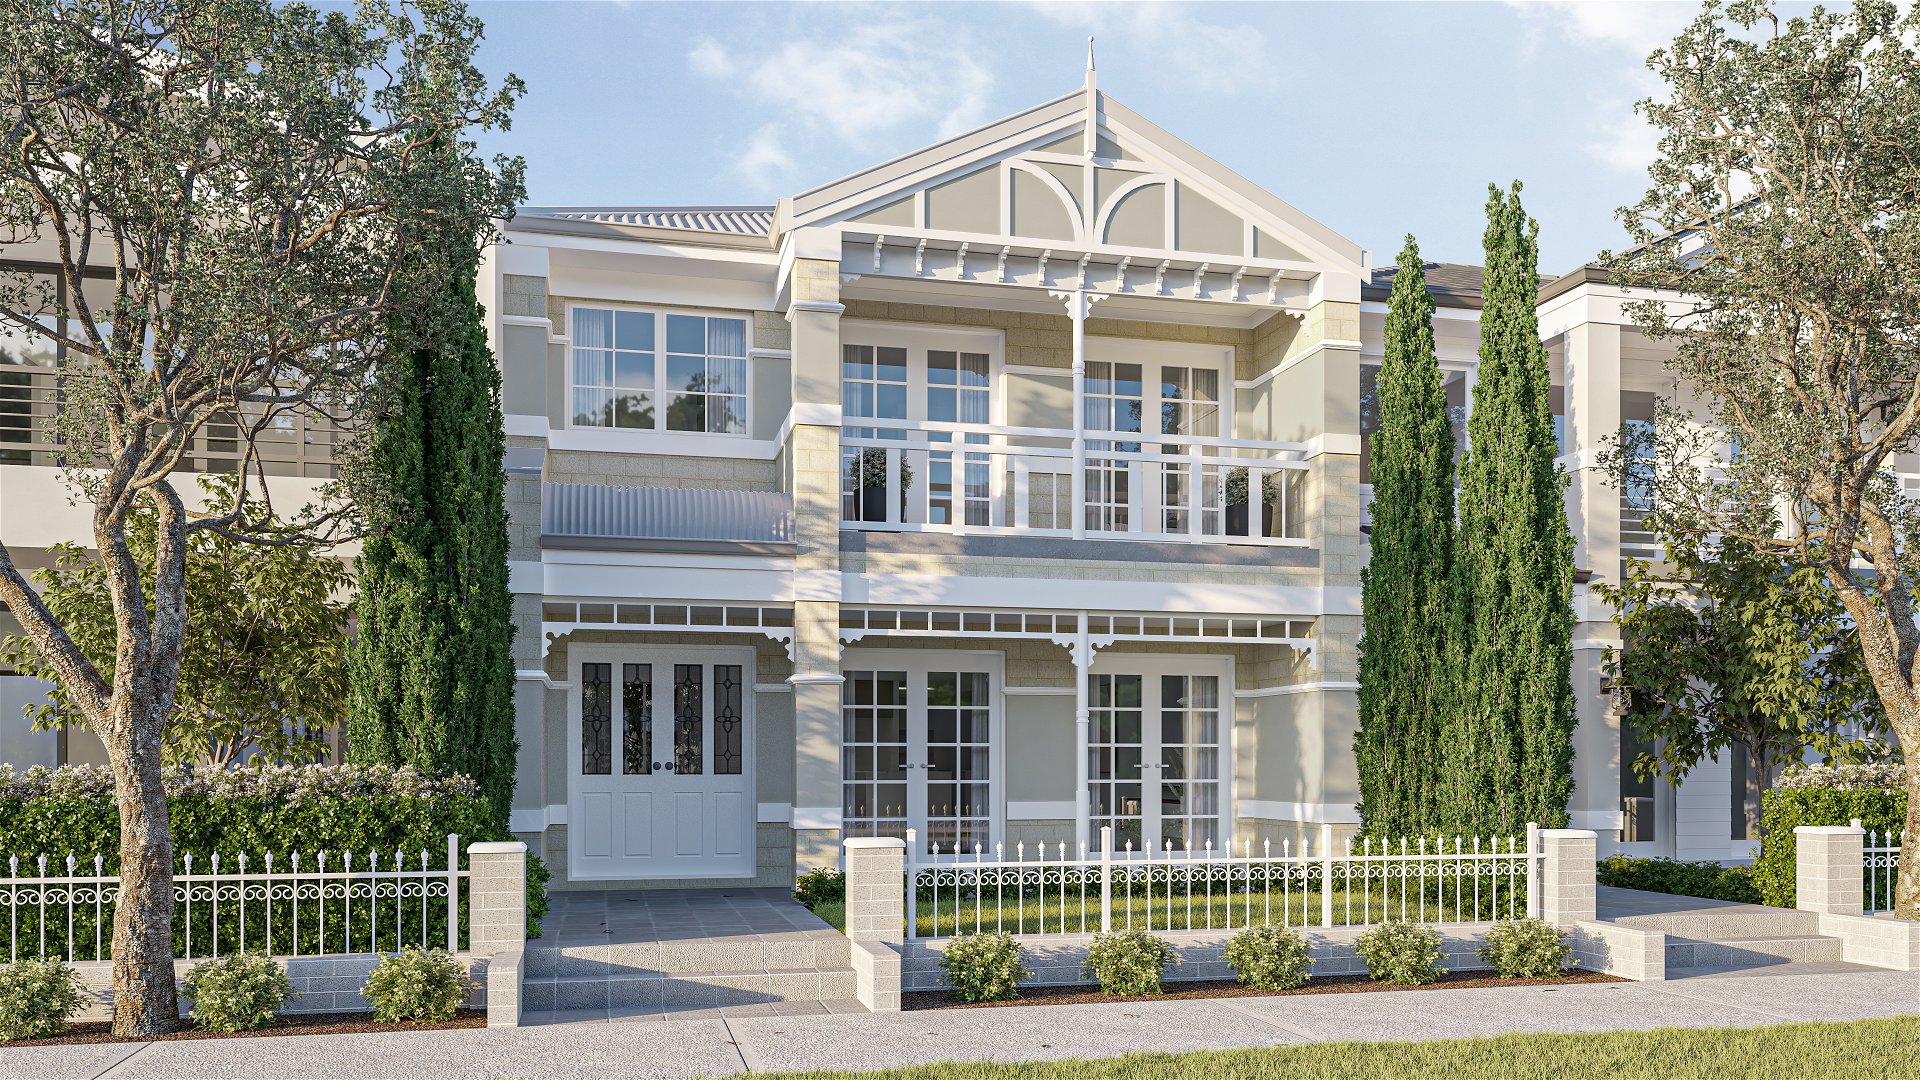 Plunkett Homes - Newcastle | Federation - Gallery - Newcastle Luxe Federation